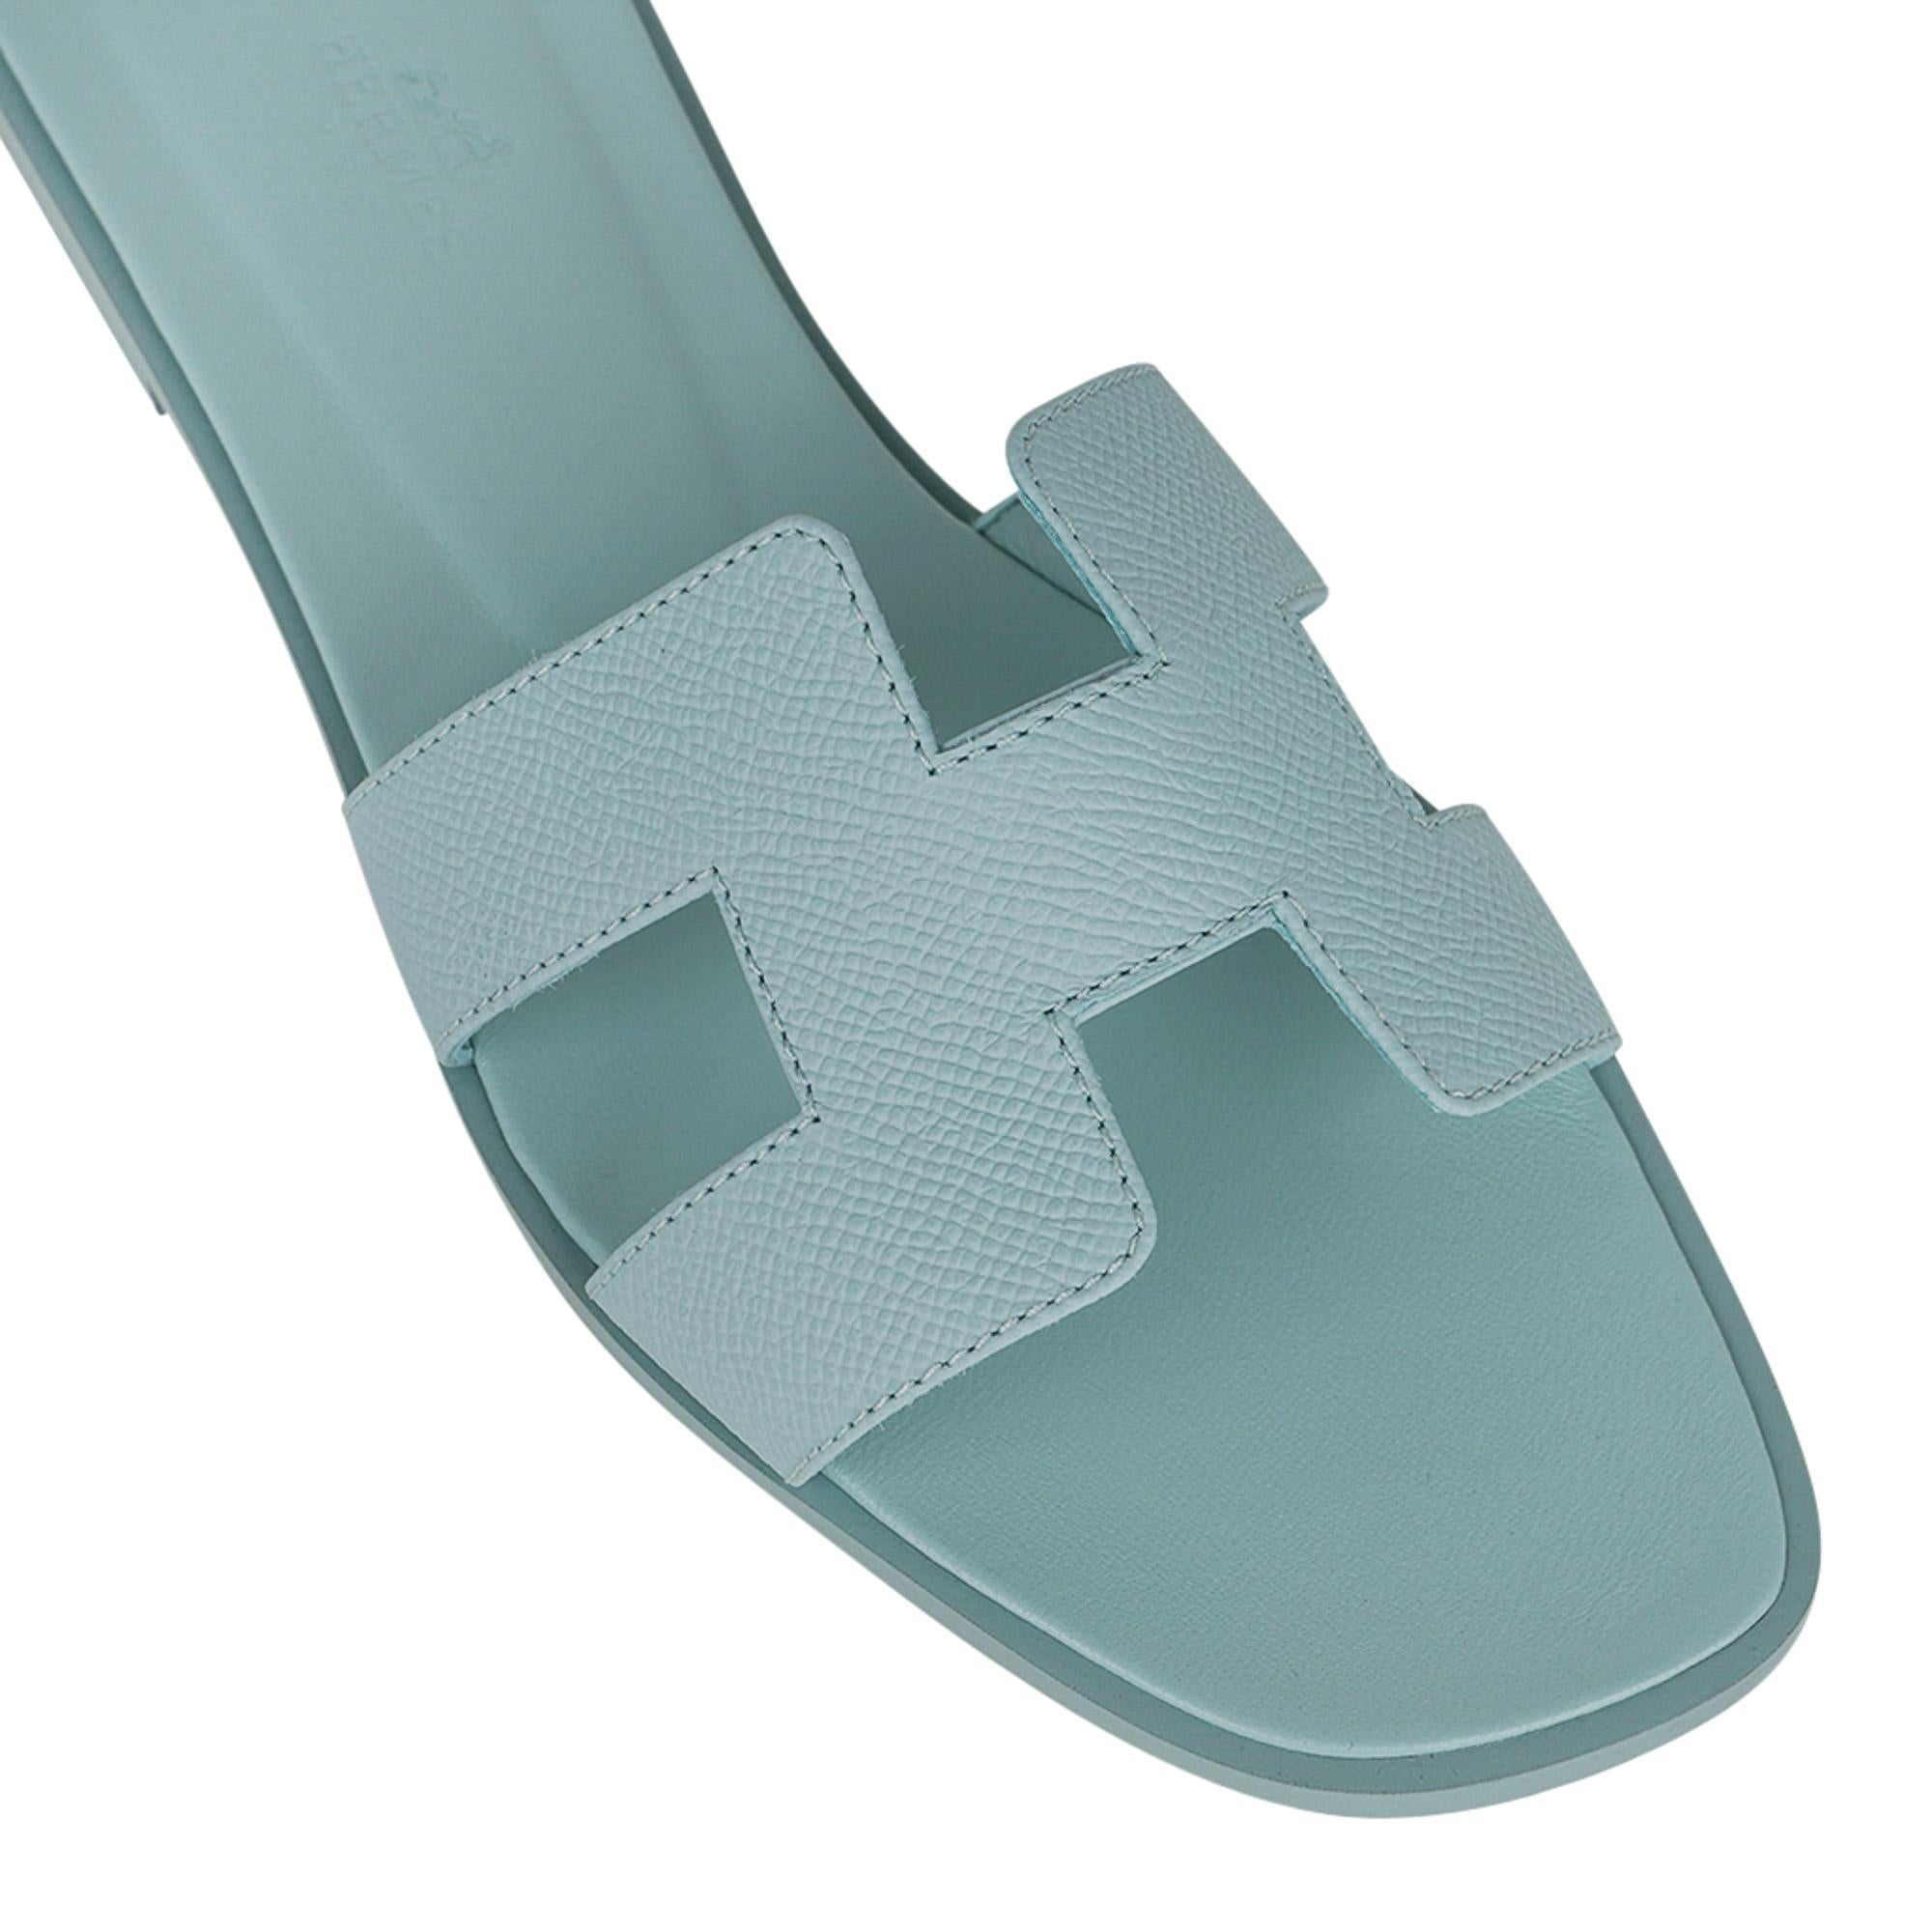 Mightychic offers Hermes Oran flat sandals featured in Vert Embrun.
This stunning limited edition Hermes Oran slide sandal is in the softest sea foam hue - stunning.
The iconic H cutout over the top of the foot.
Matching embossed calfskin